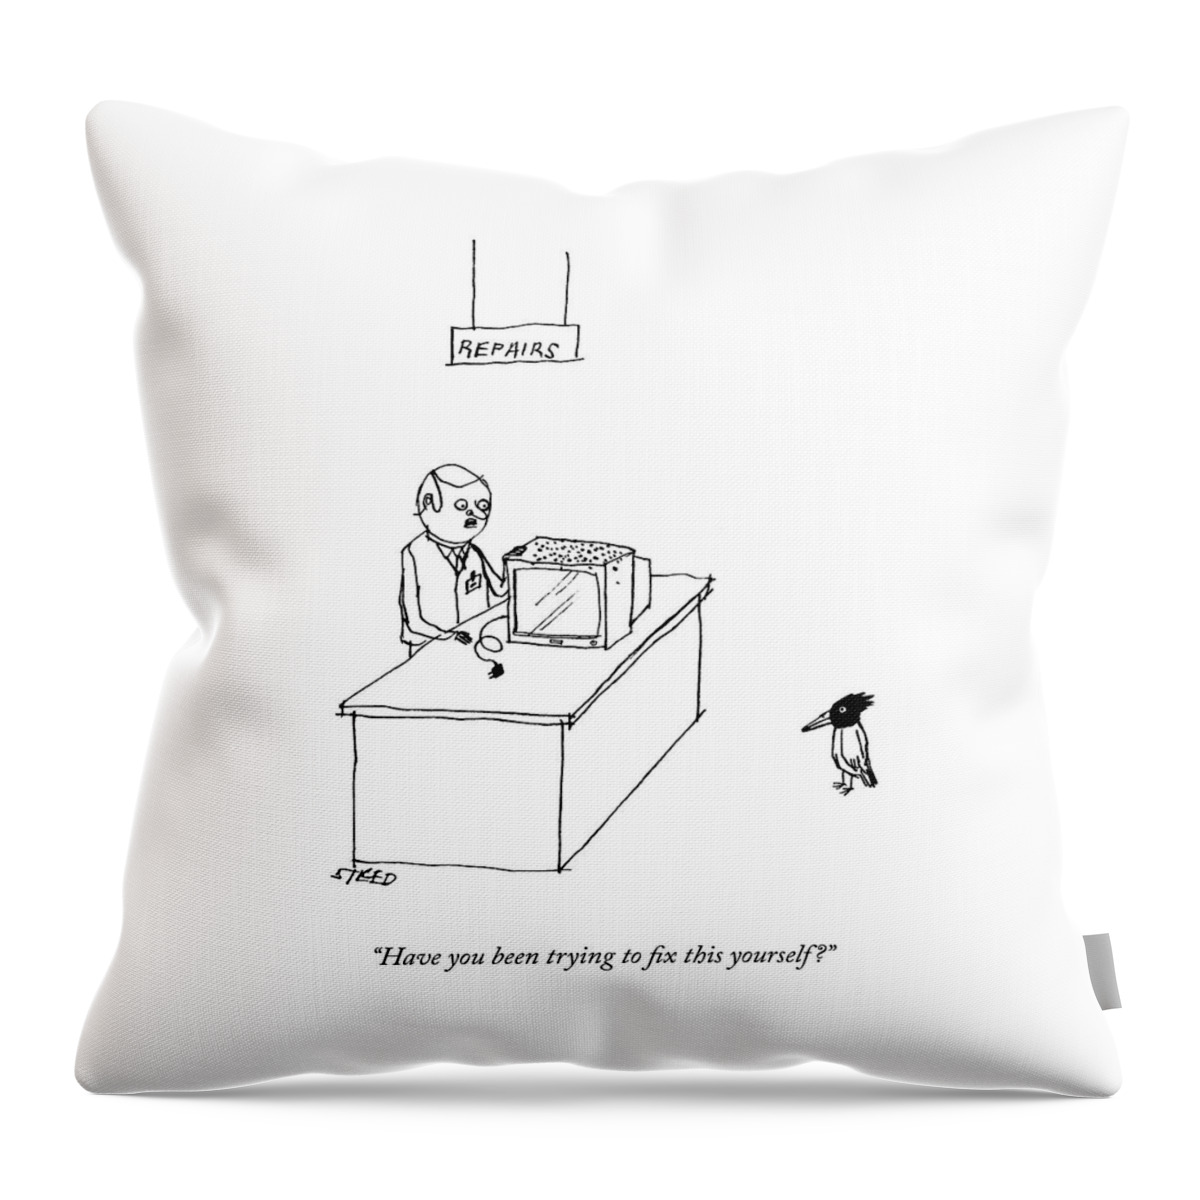 Do It Yourself Television Repair Throw Pillow